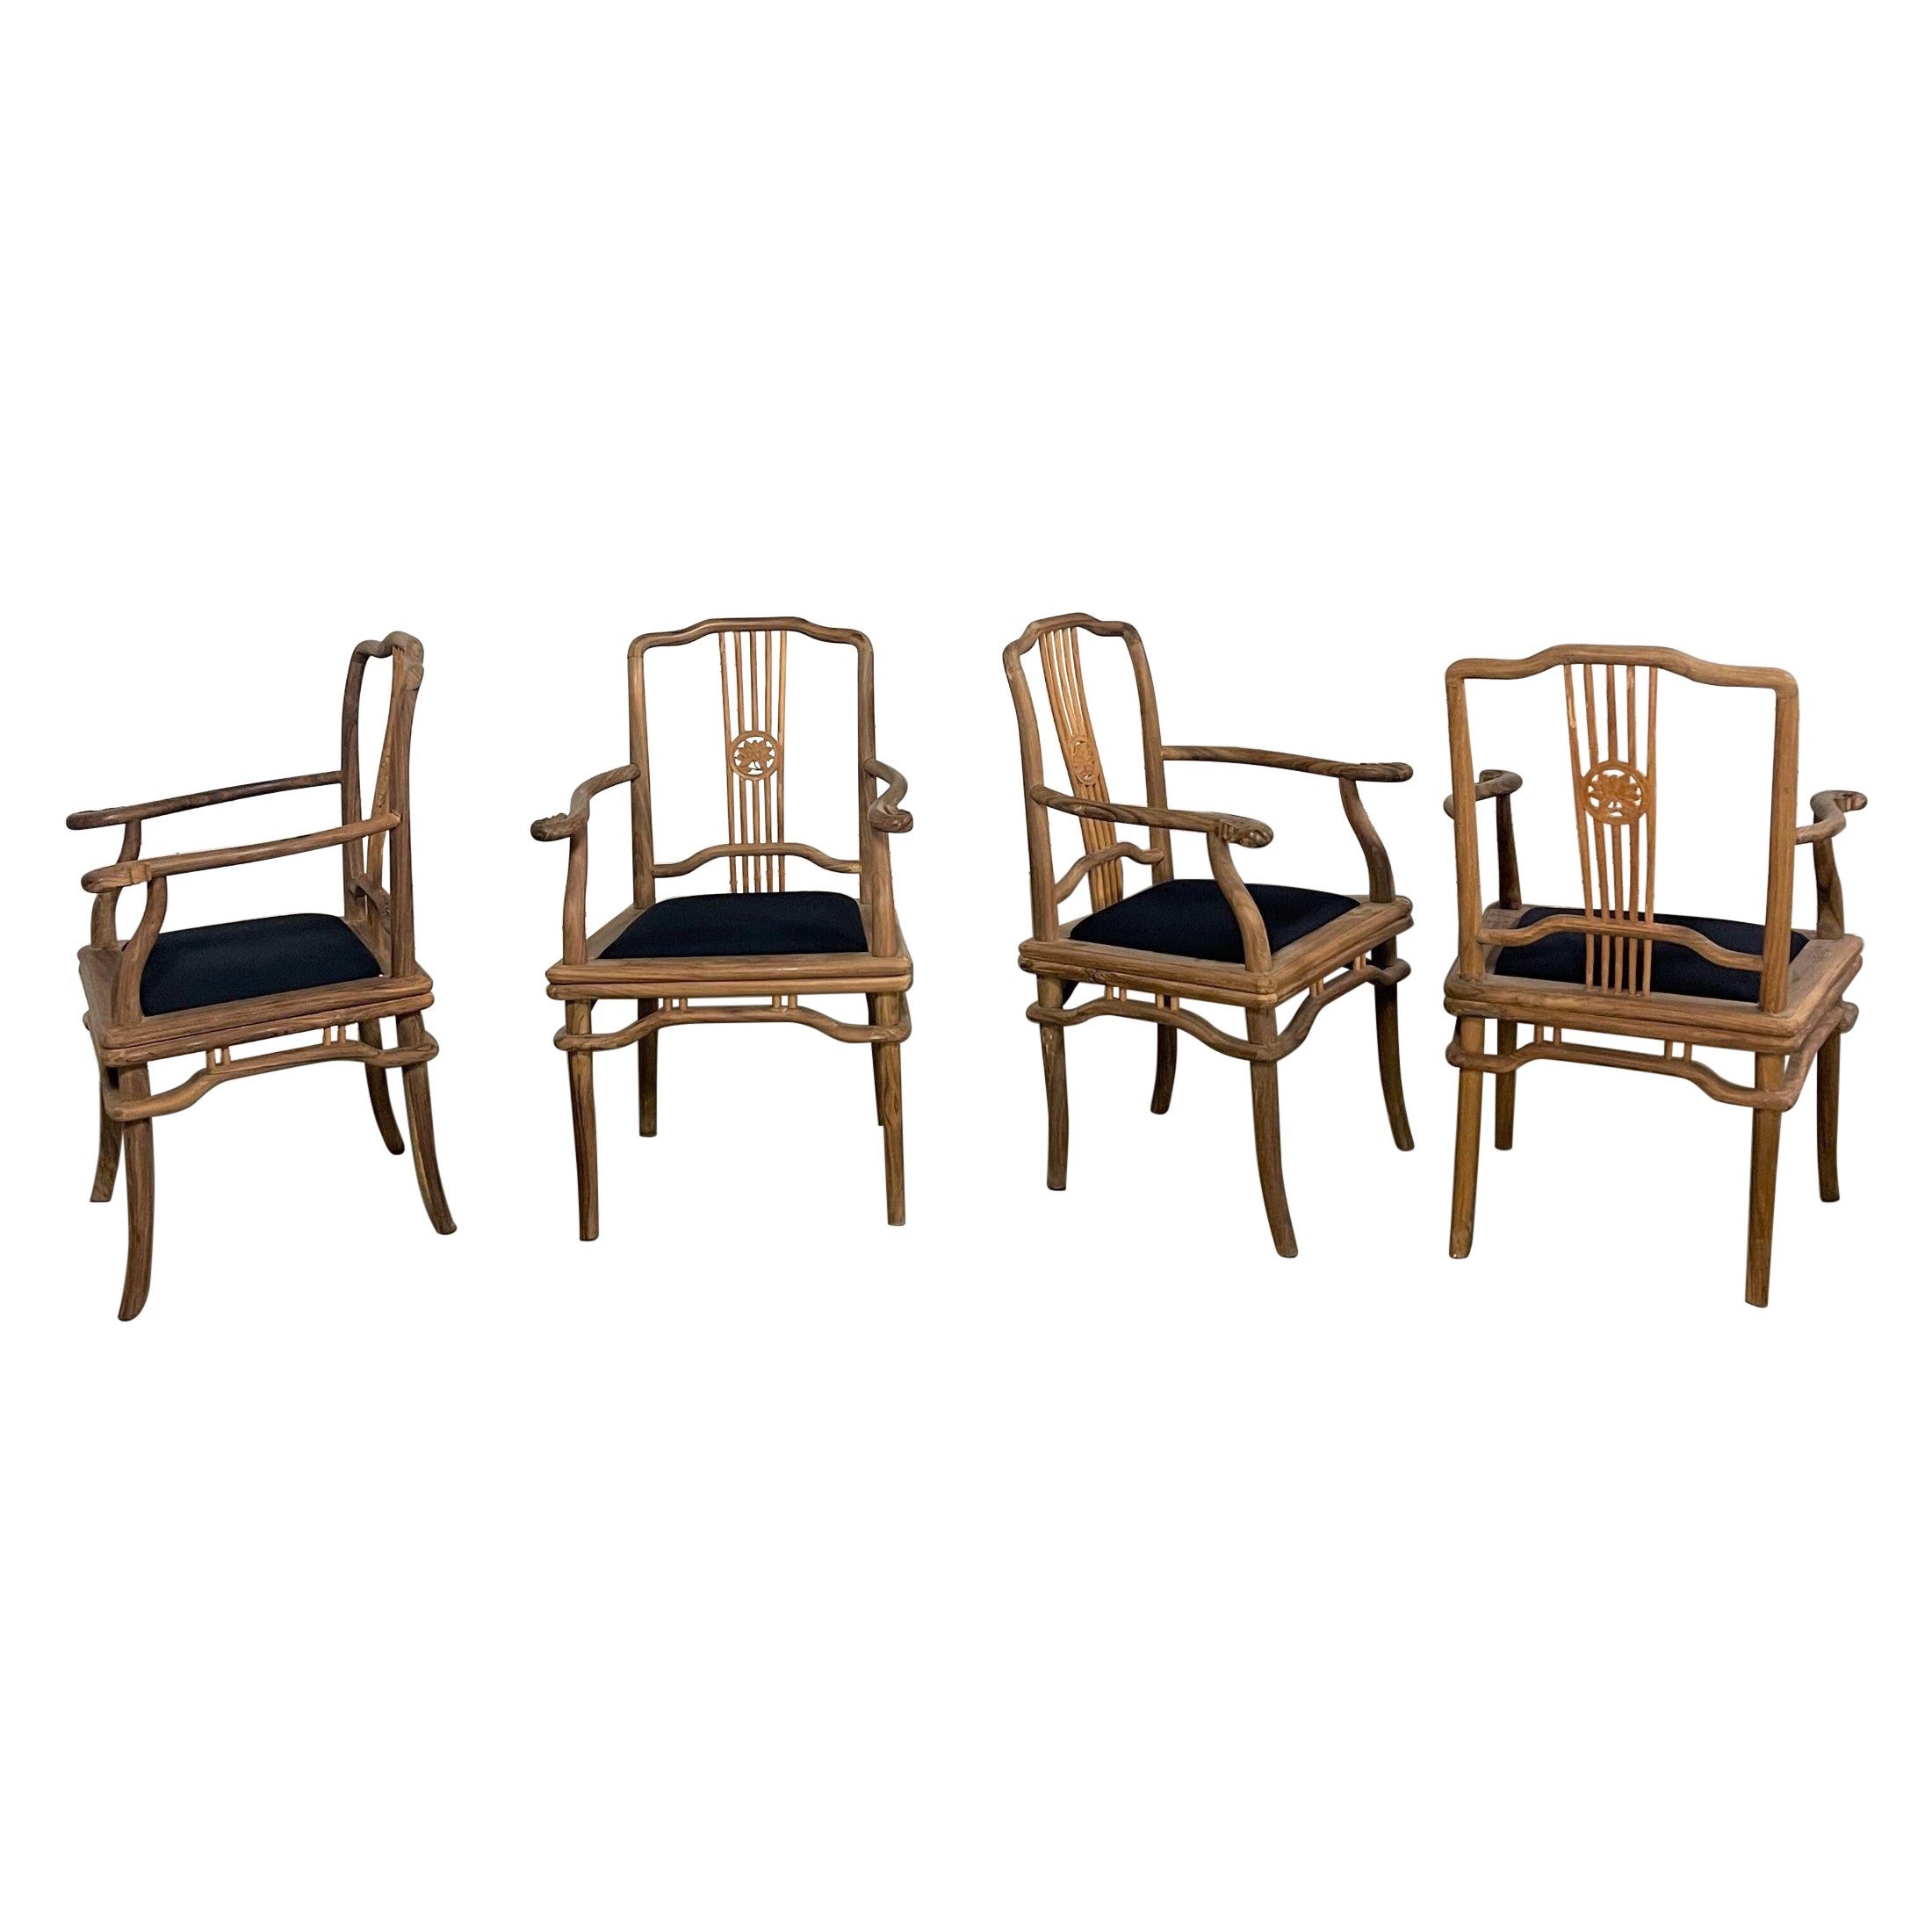 Late 20th Ming Style Indonesian Dining Armed Chairs Natural Teak w/ Black Seats For Sale